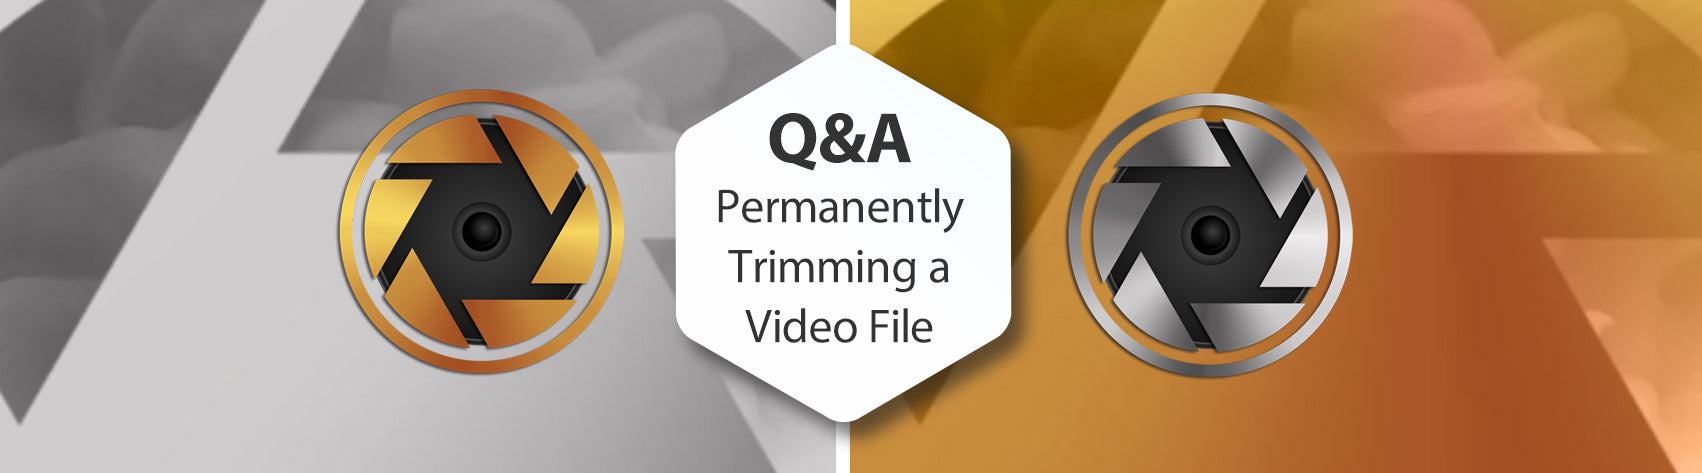 Q&A - How to Permanently Trim a Video File inside Photopia